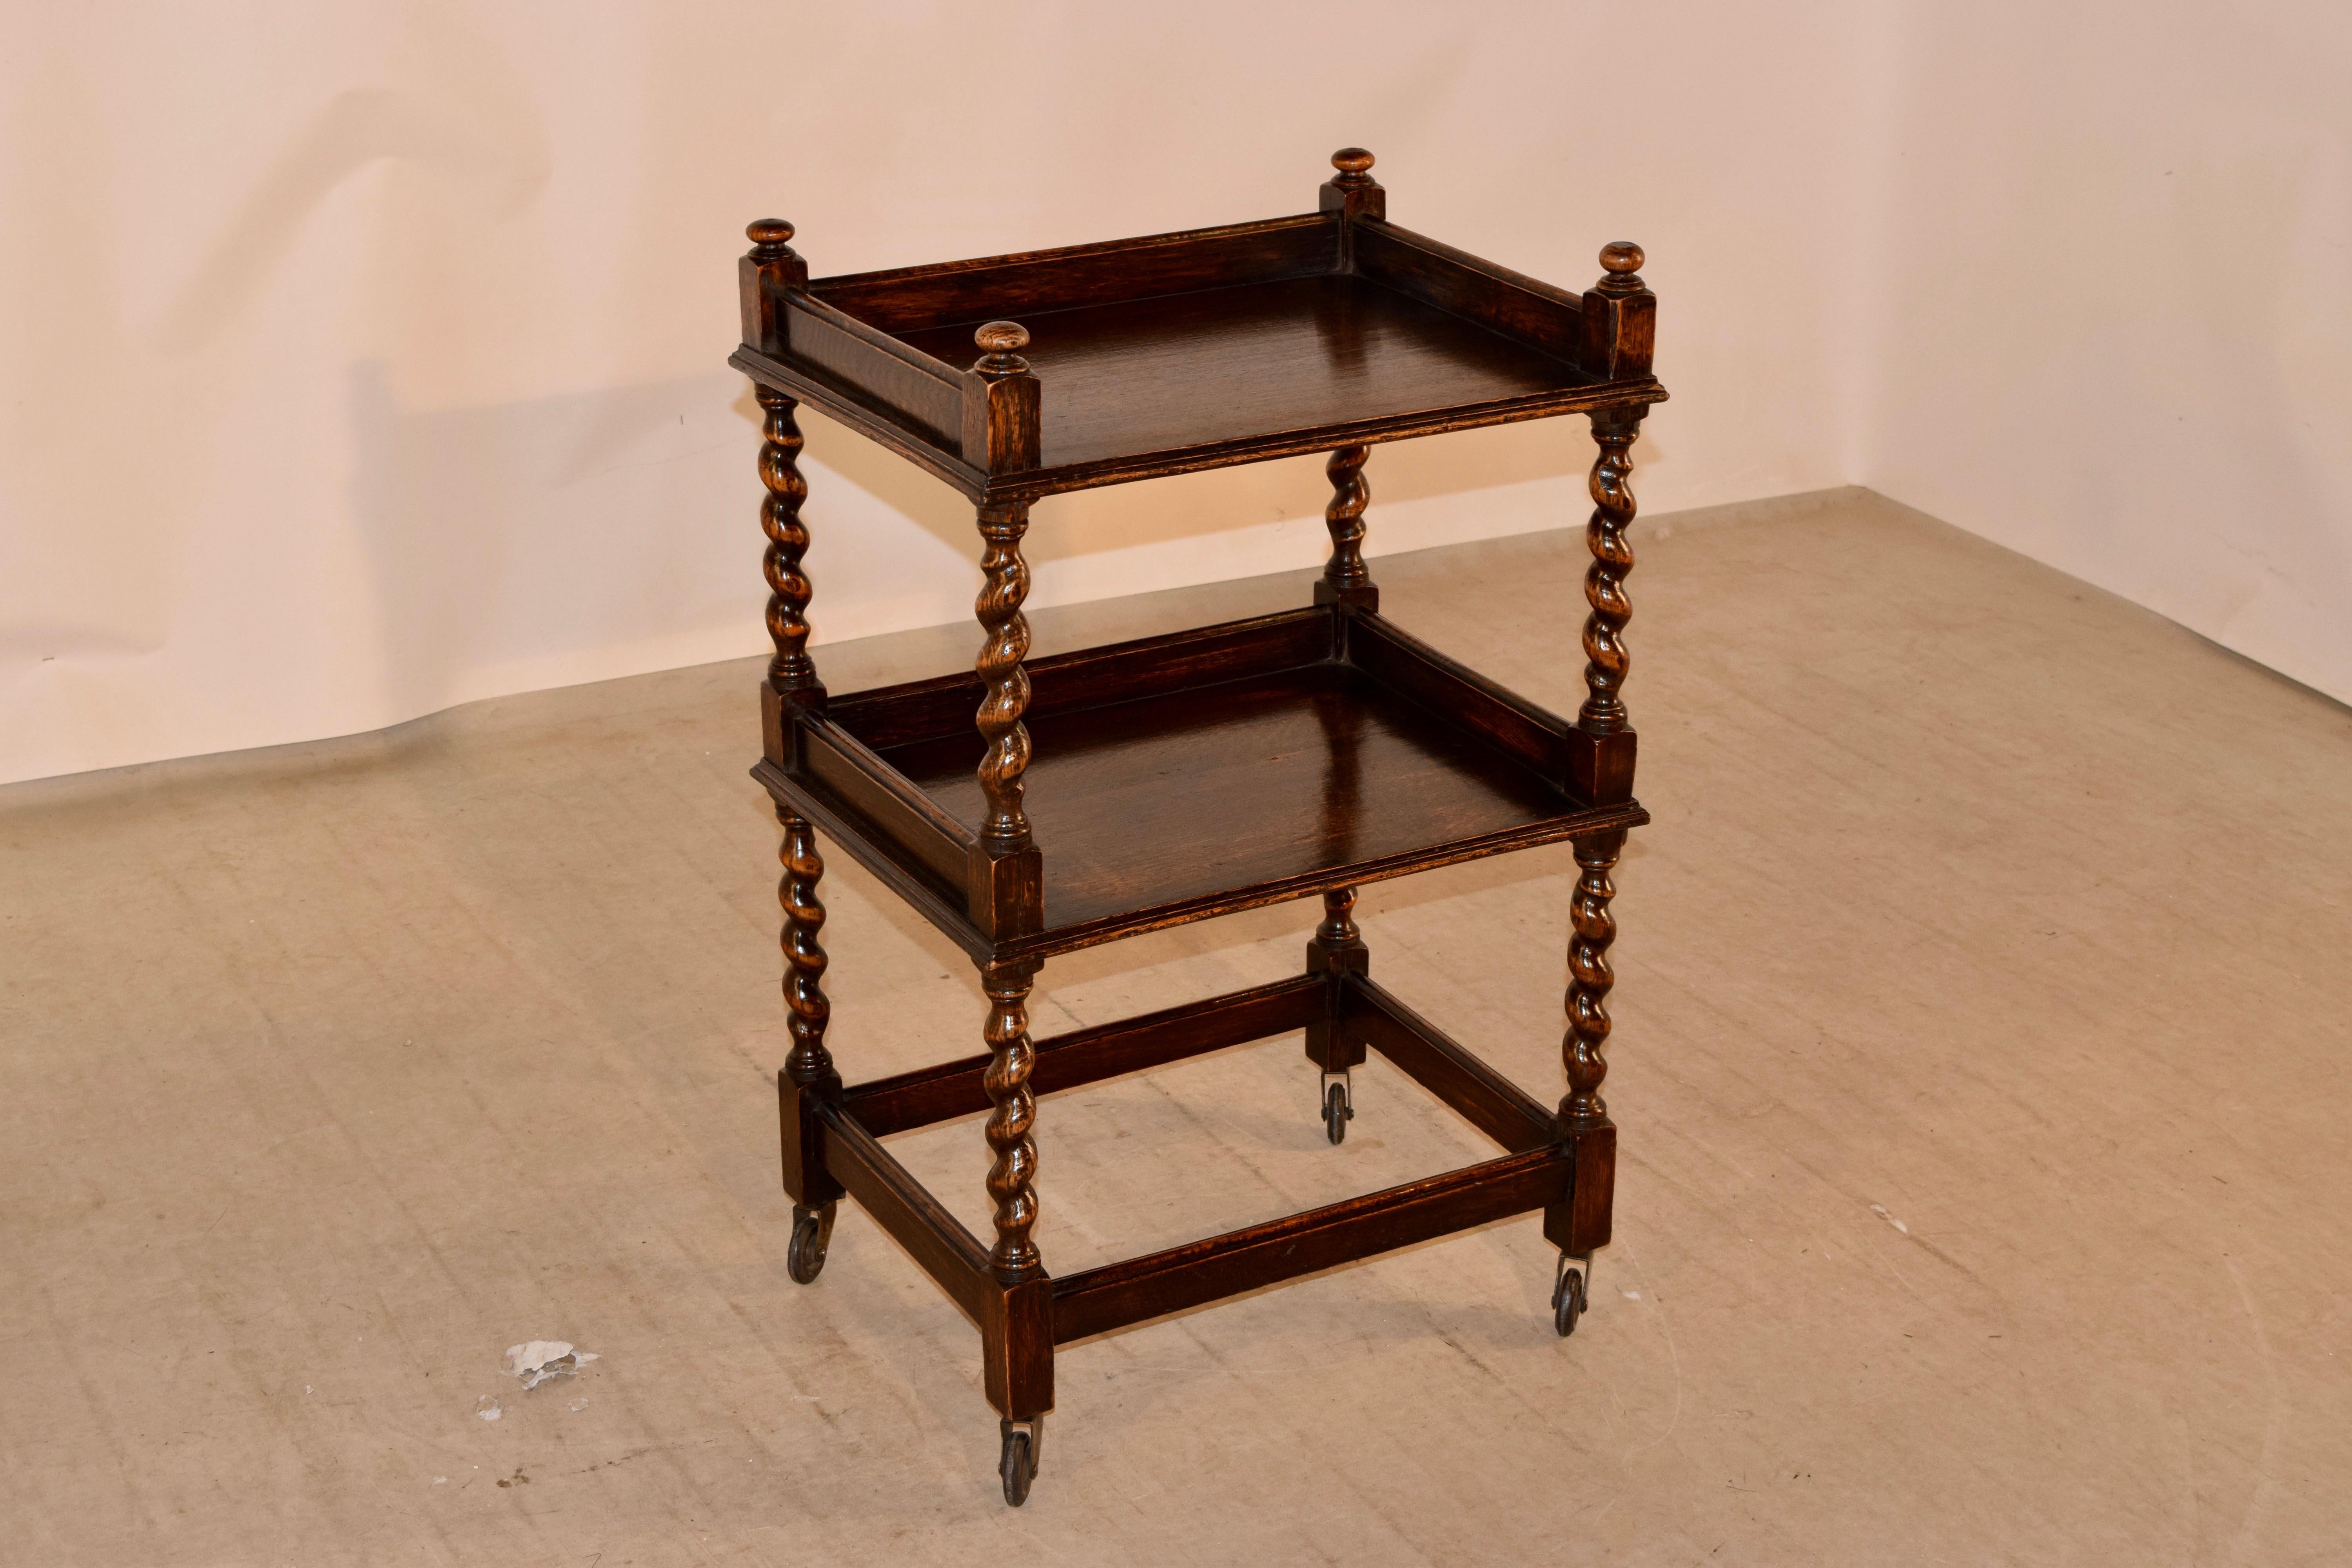 19th century oak drinks cart from England with finials on the top, following down to galleries around the two shelves, separated by hand-turned barley twist shelf supports. The cart is supported on matching hand-turned barley twist legs, joined by